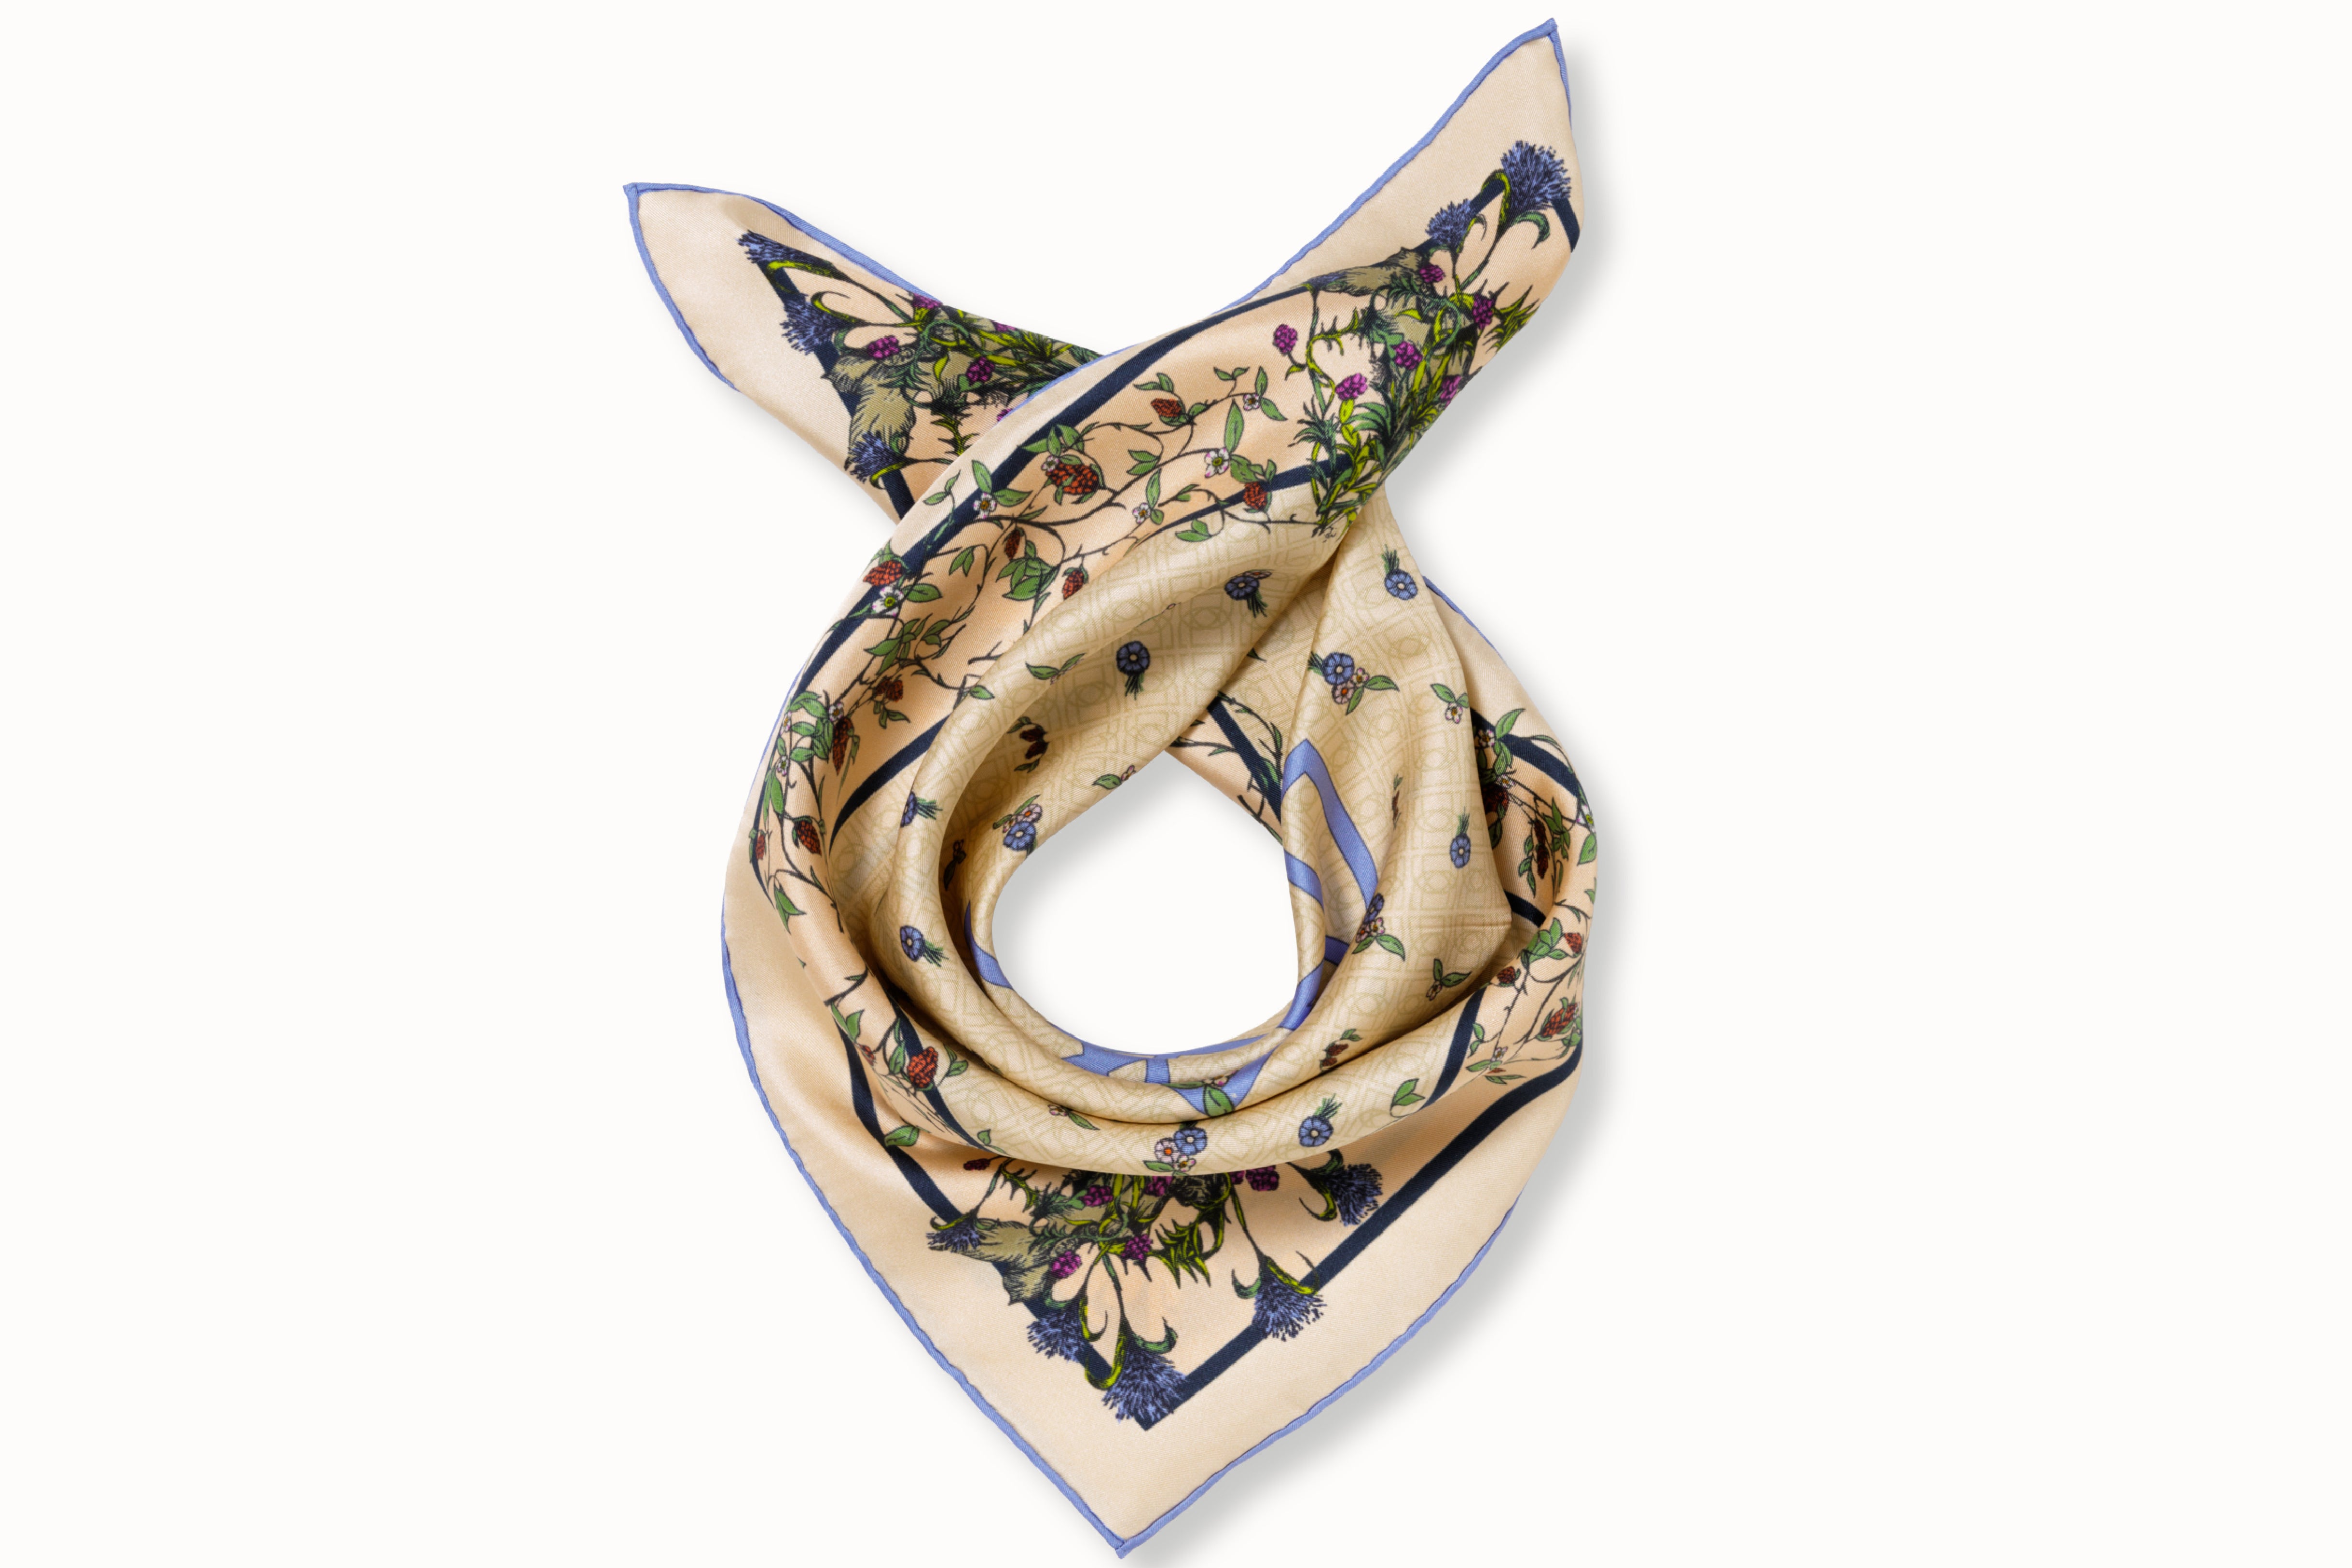 Rolled image of 100% silk square scarf  featuring an English garden-inspired floral illustration motif with a periwinkle blue version of the brand logo dominantly featured in the middle of design against on a warm neutral background and a periwinkle blue edge.